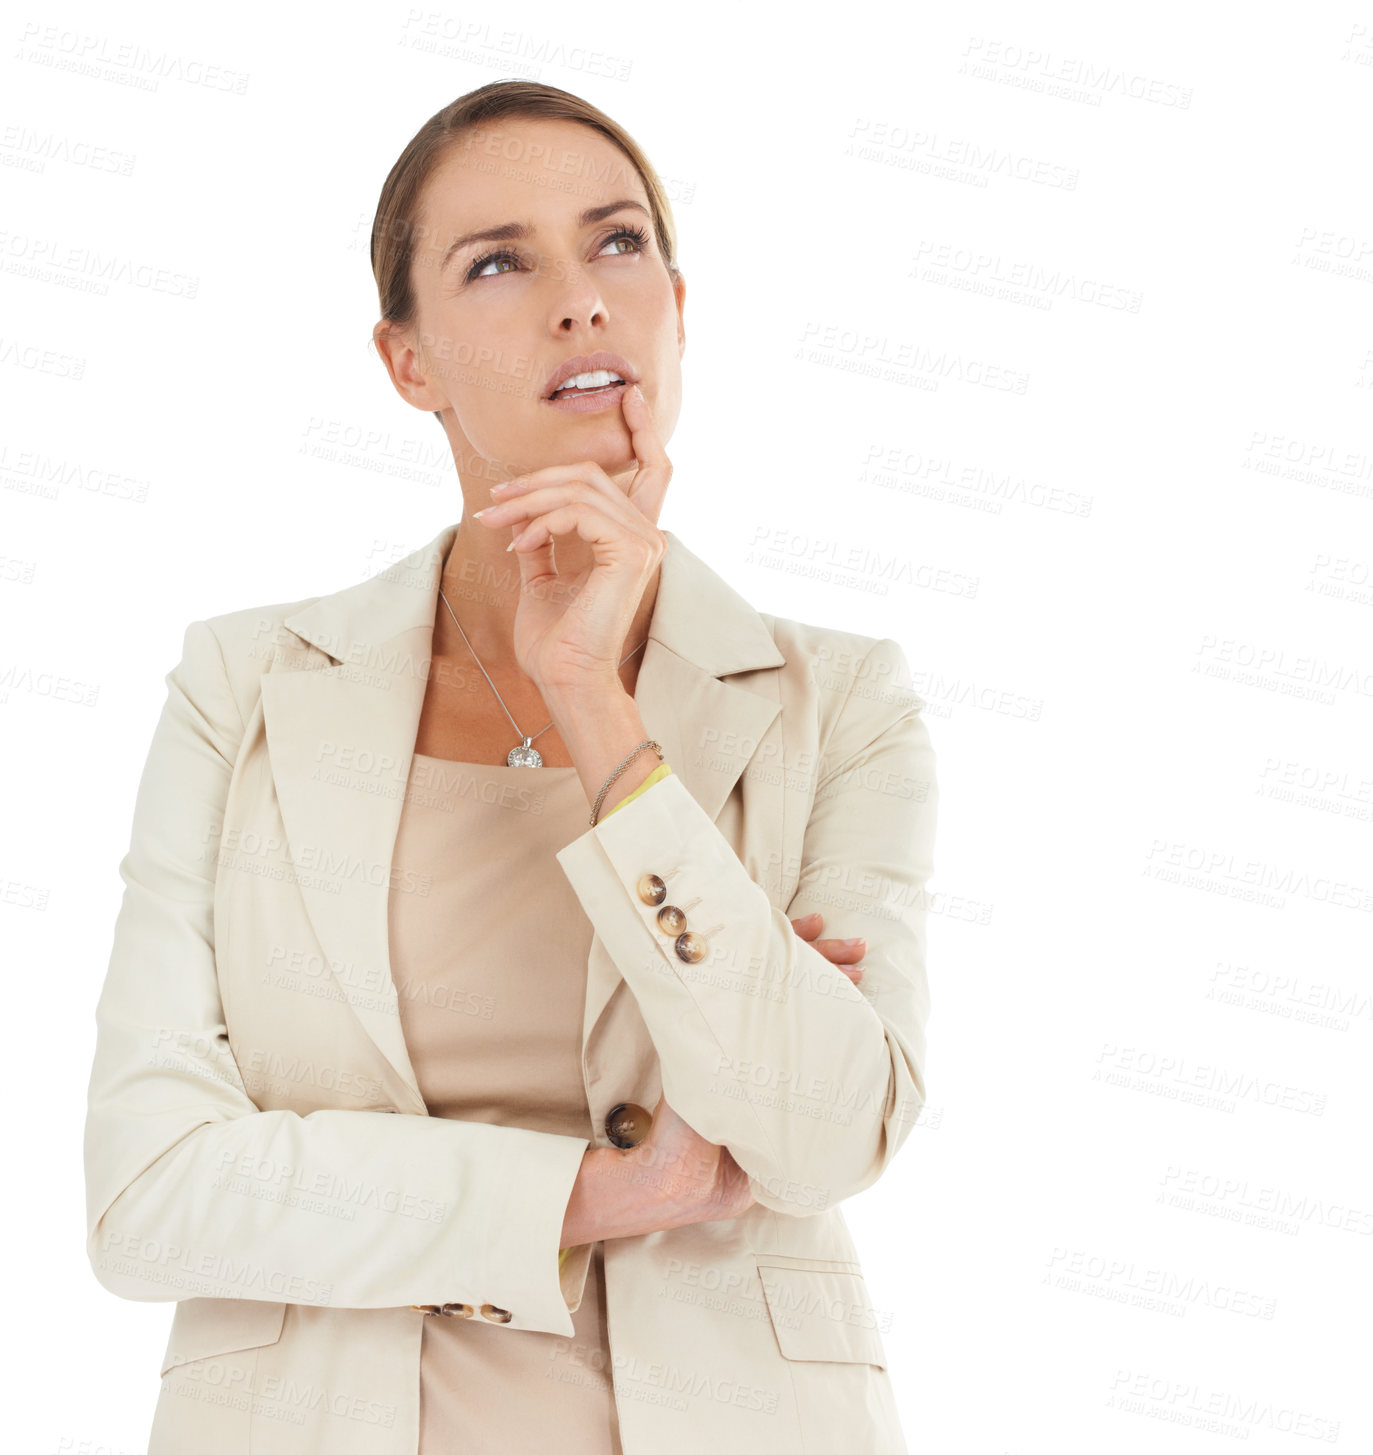 Buy stock photo An attractive businesswoman looking thoughtful with her hand on her chin